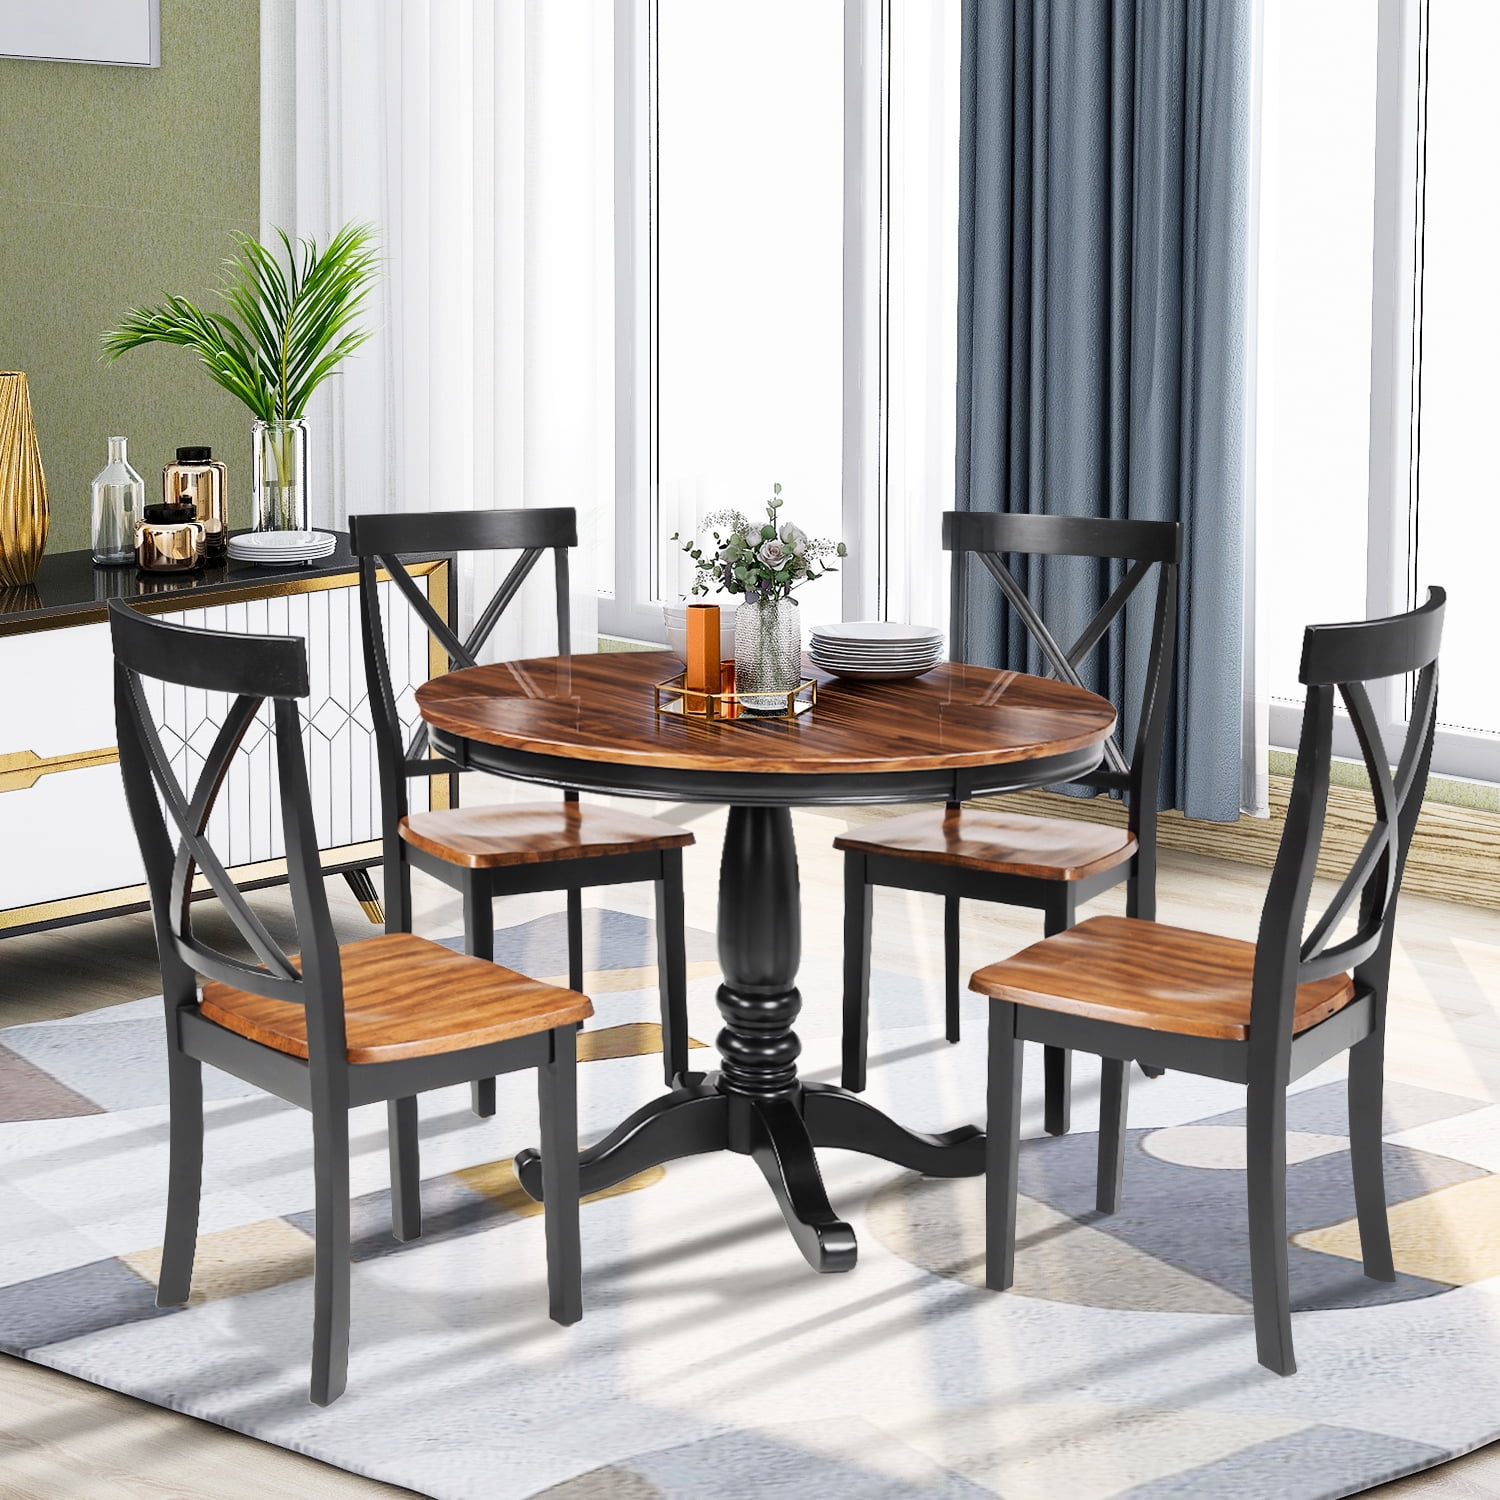 Round Dining Table Set, Small Round Mahogany Dining Table And Chairs